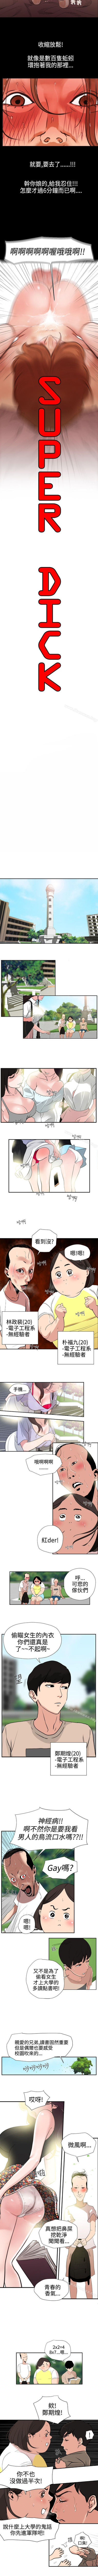 Hardcore Gay 欲求王 1-134 3some - Page 2